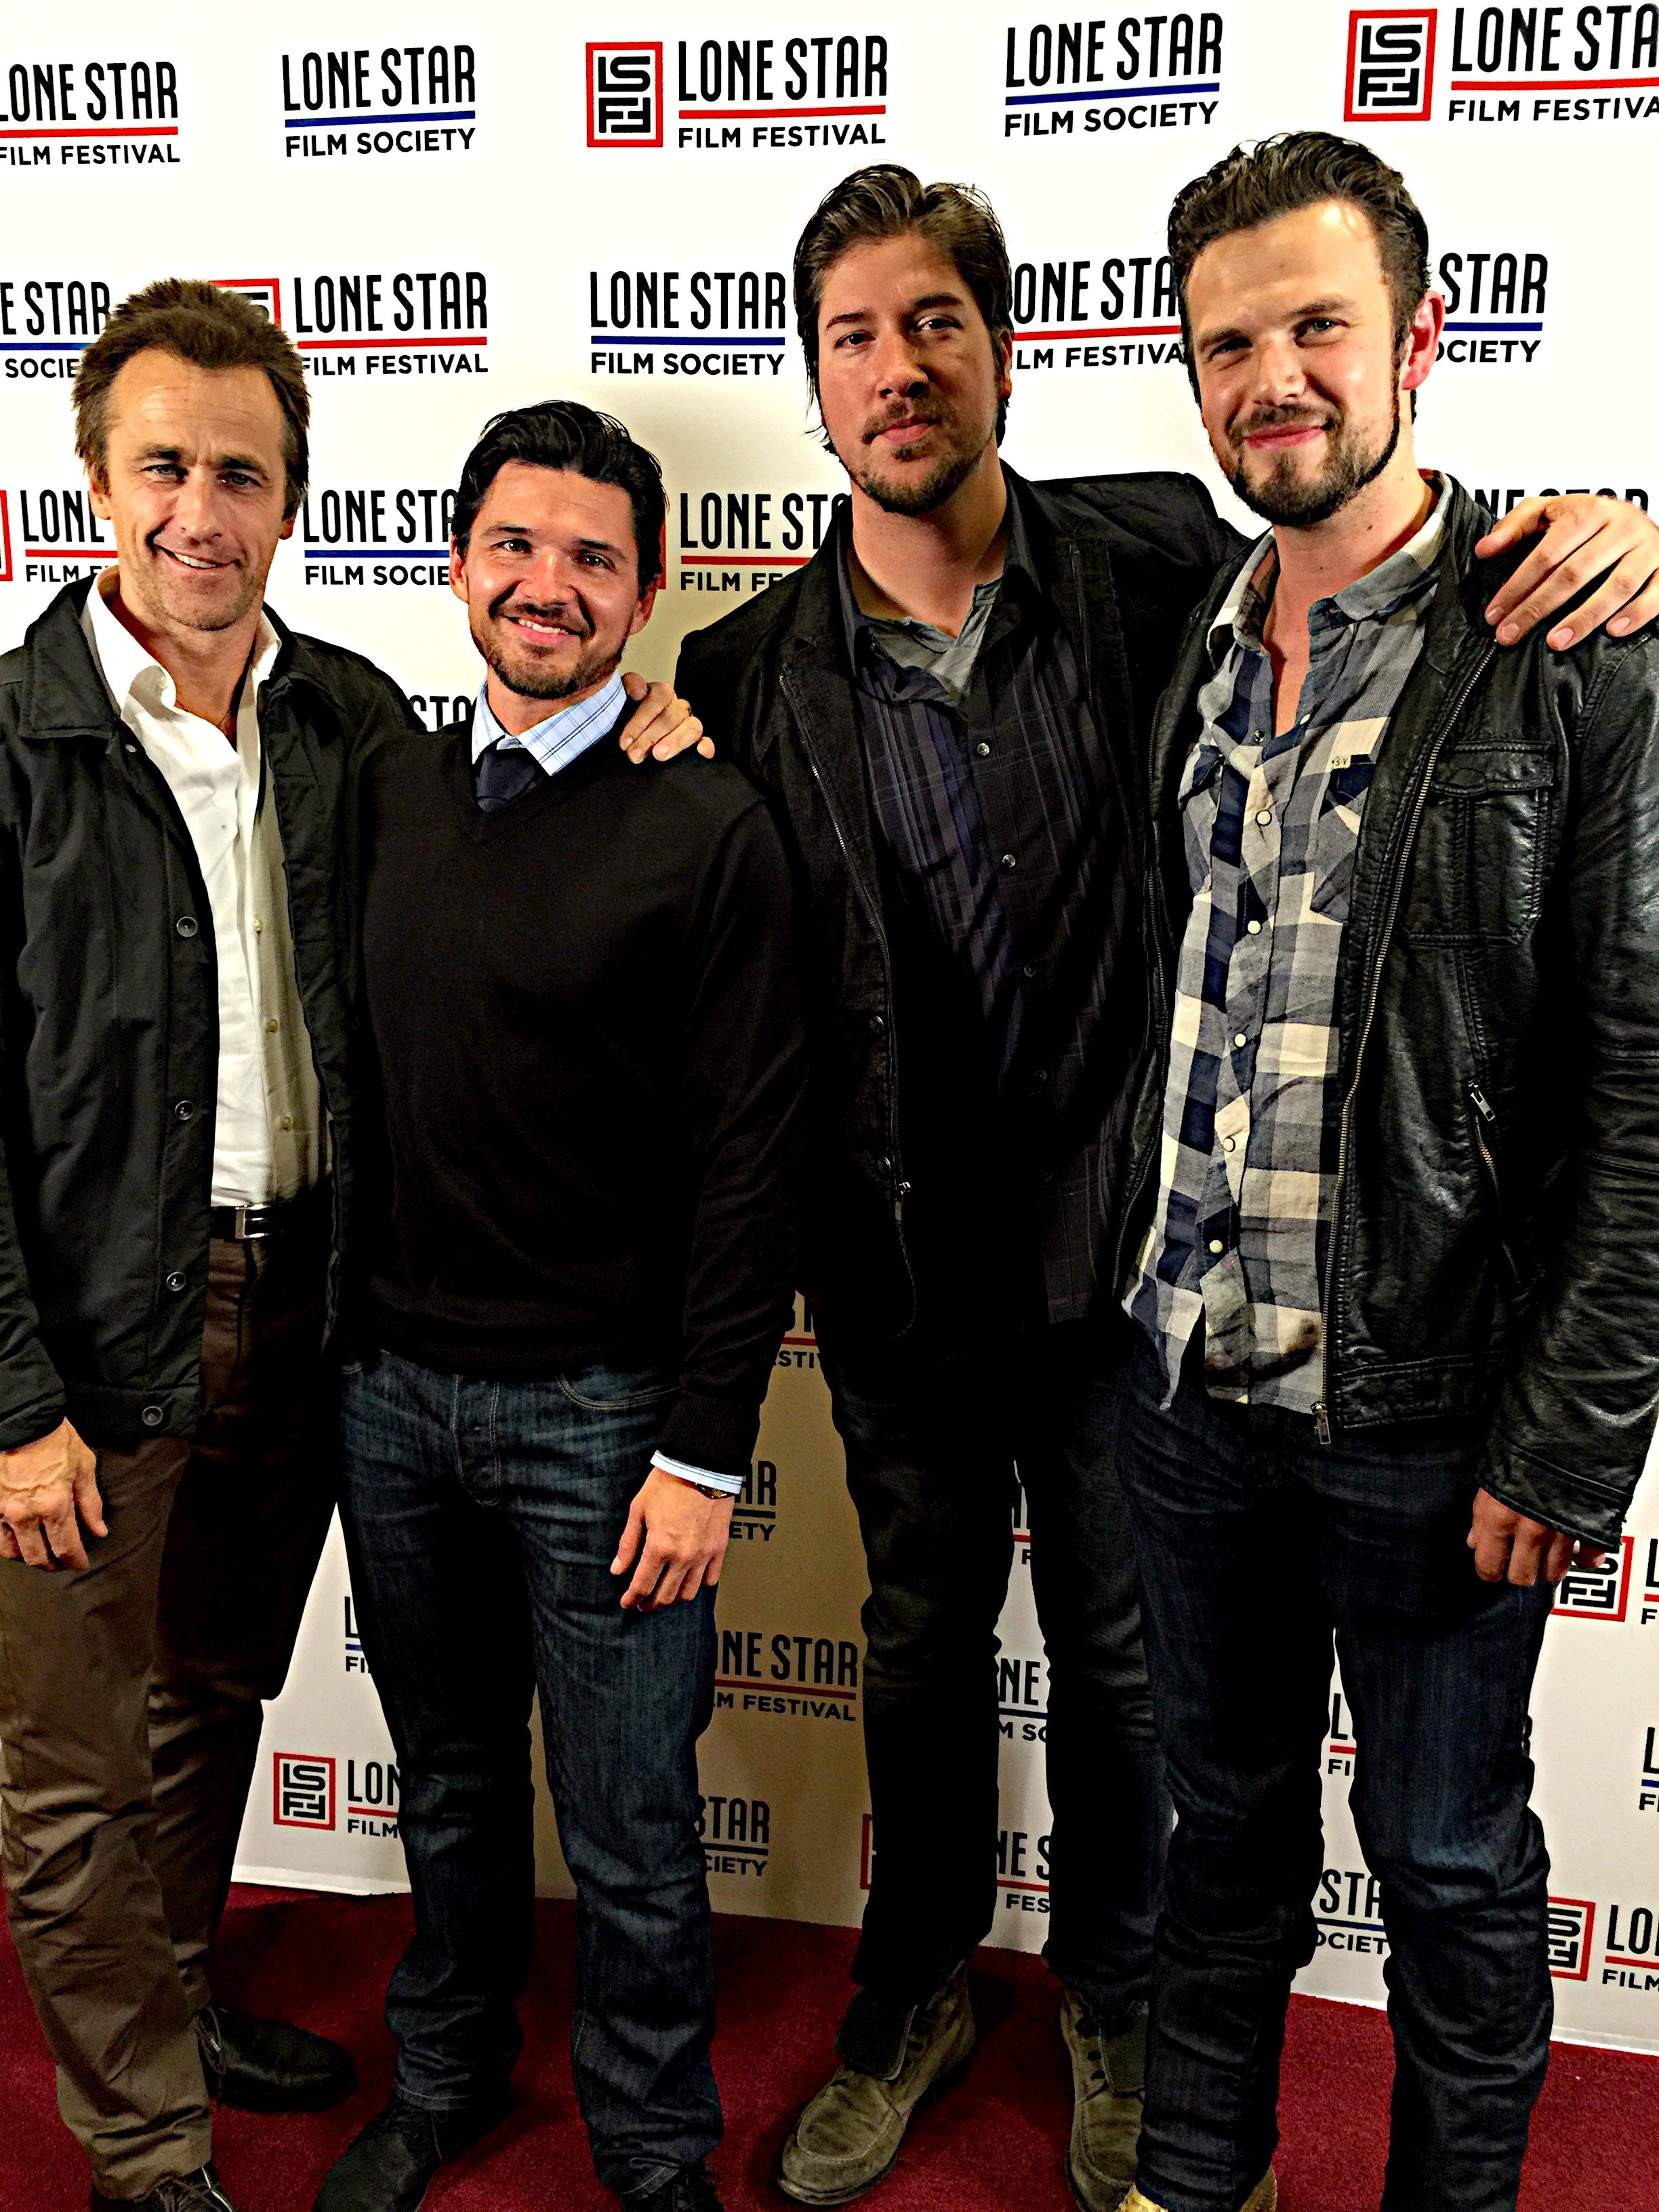 Director(s)/Actor(s) Tanner Beard & Russell Cummings with actors Ken Luckey and Crispian Belfrage on the carpet at the Texas Premier of 